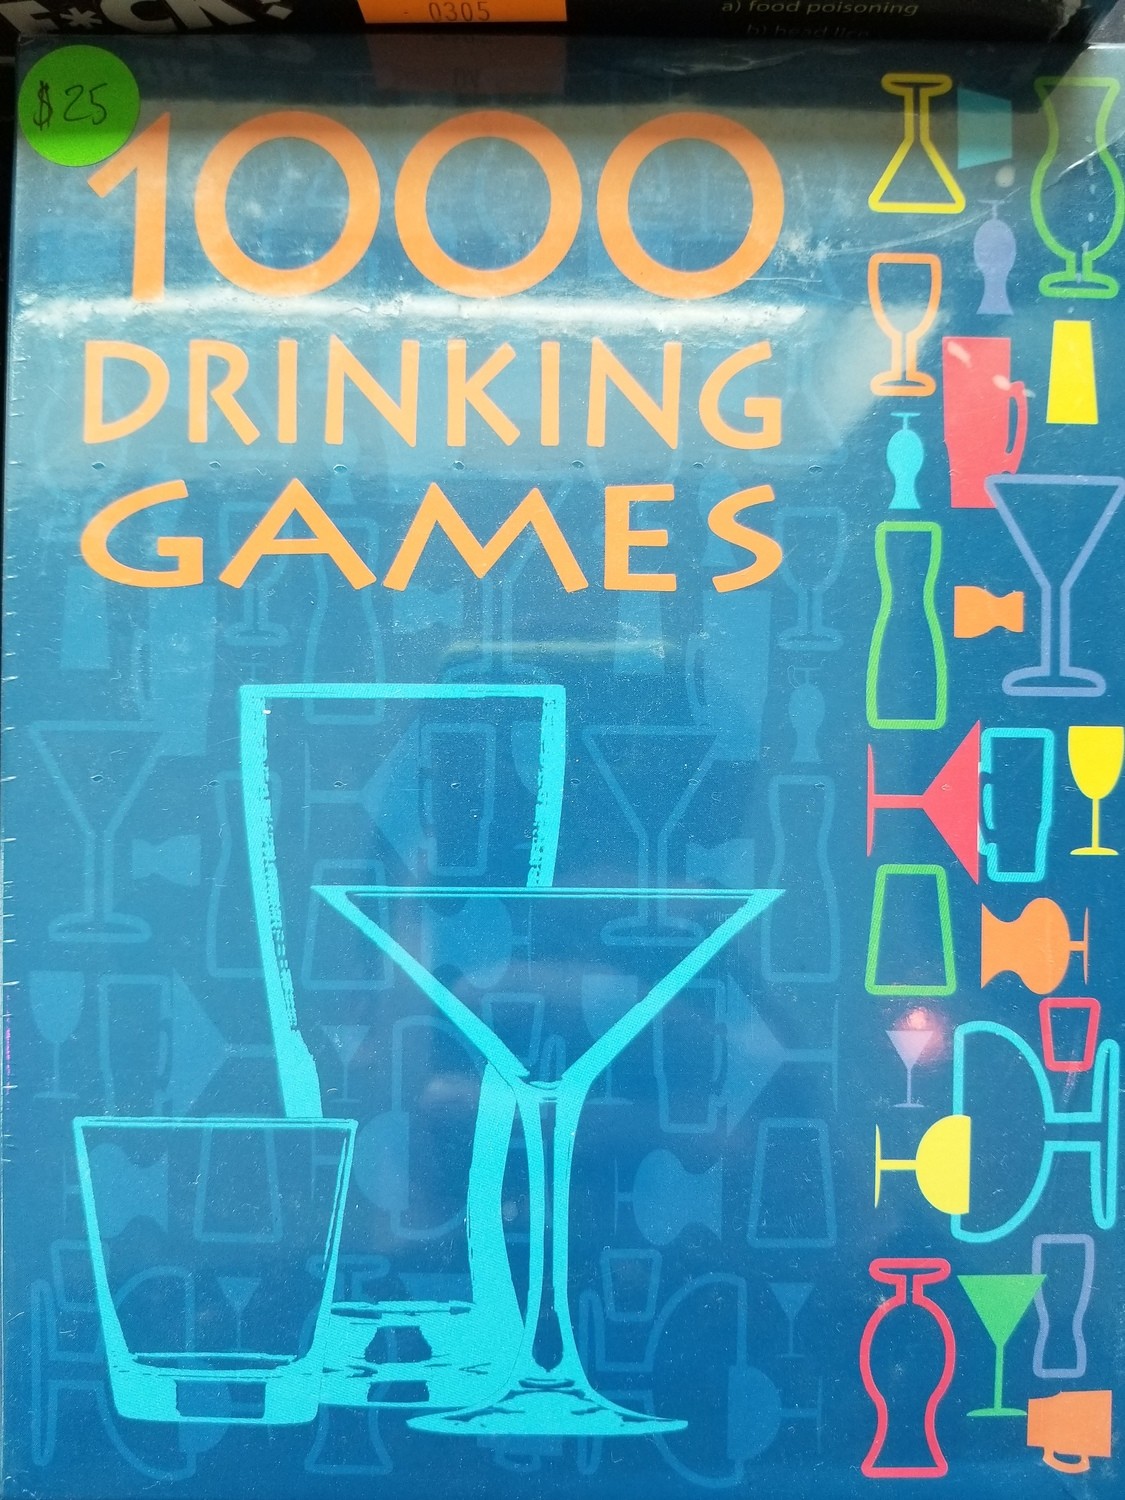 GAME 1000 DRINKING GAMES